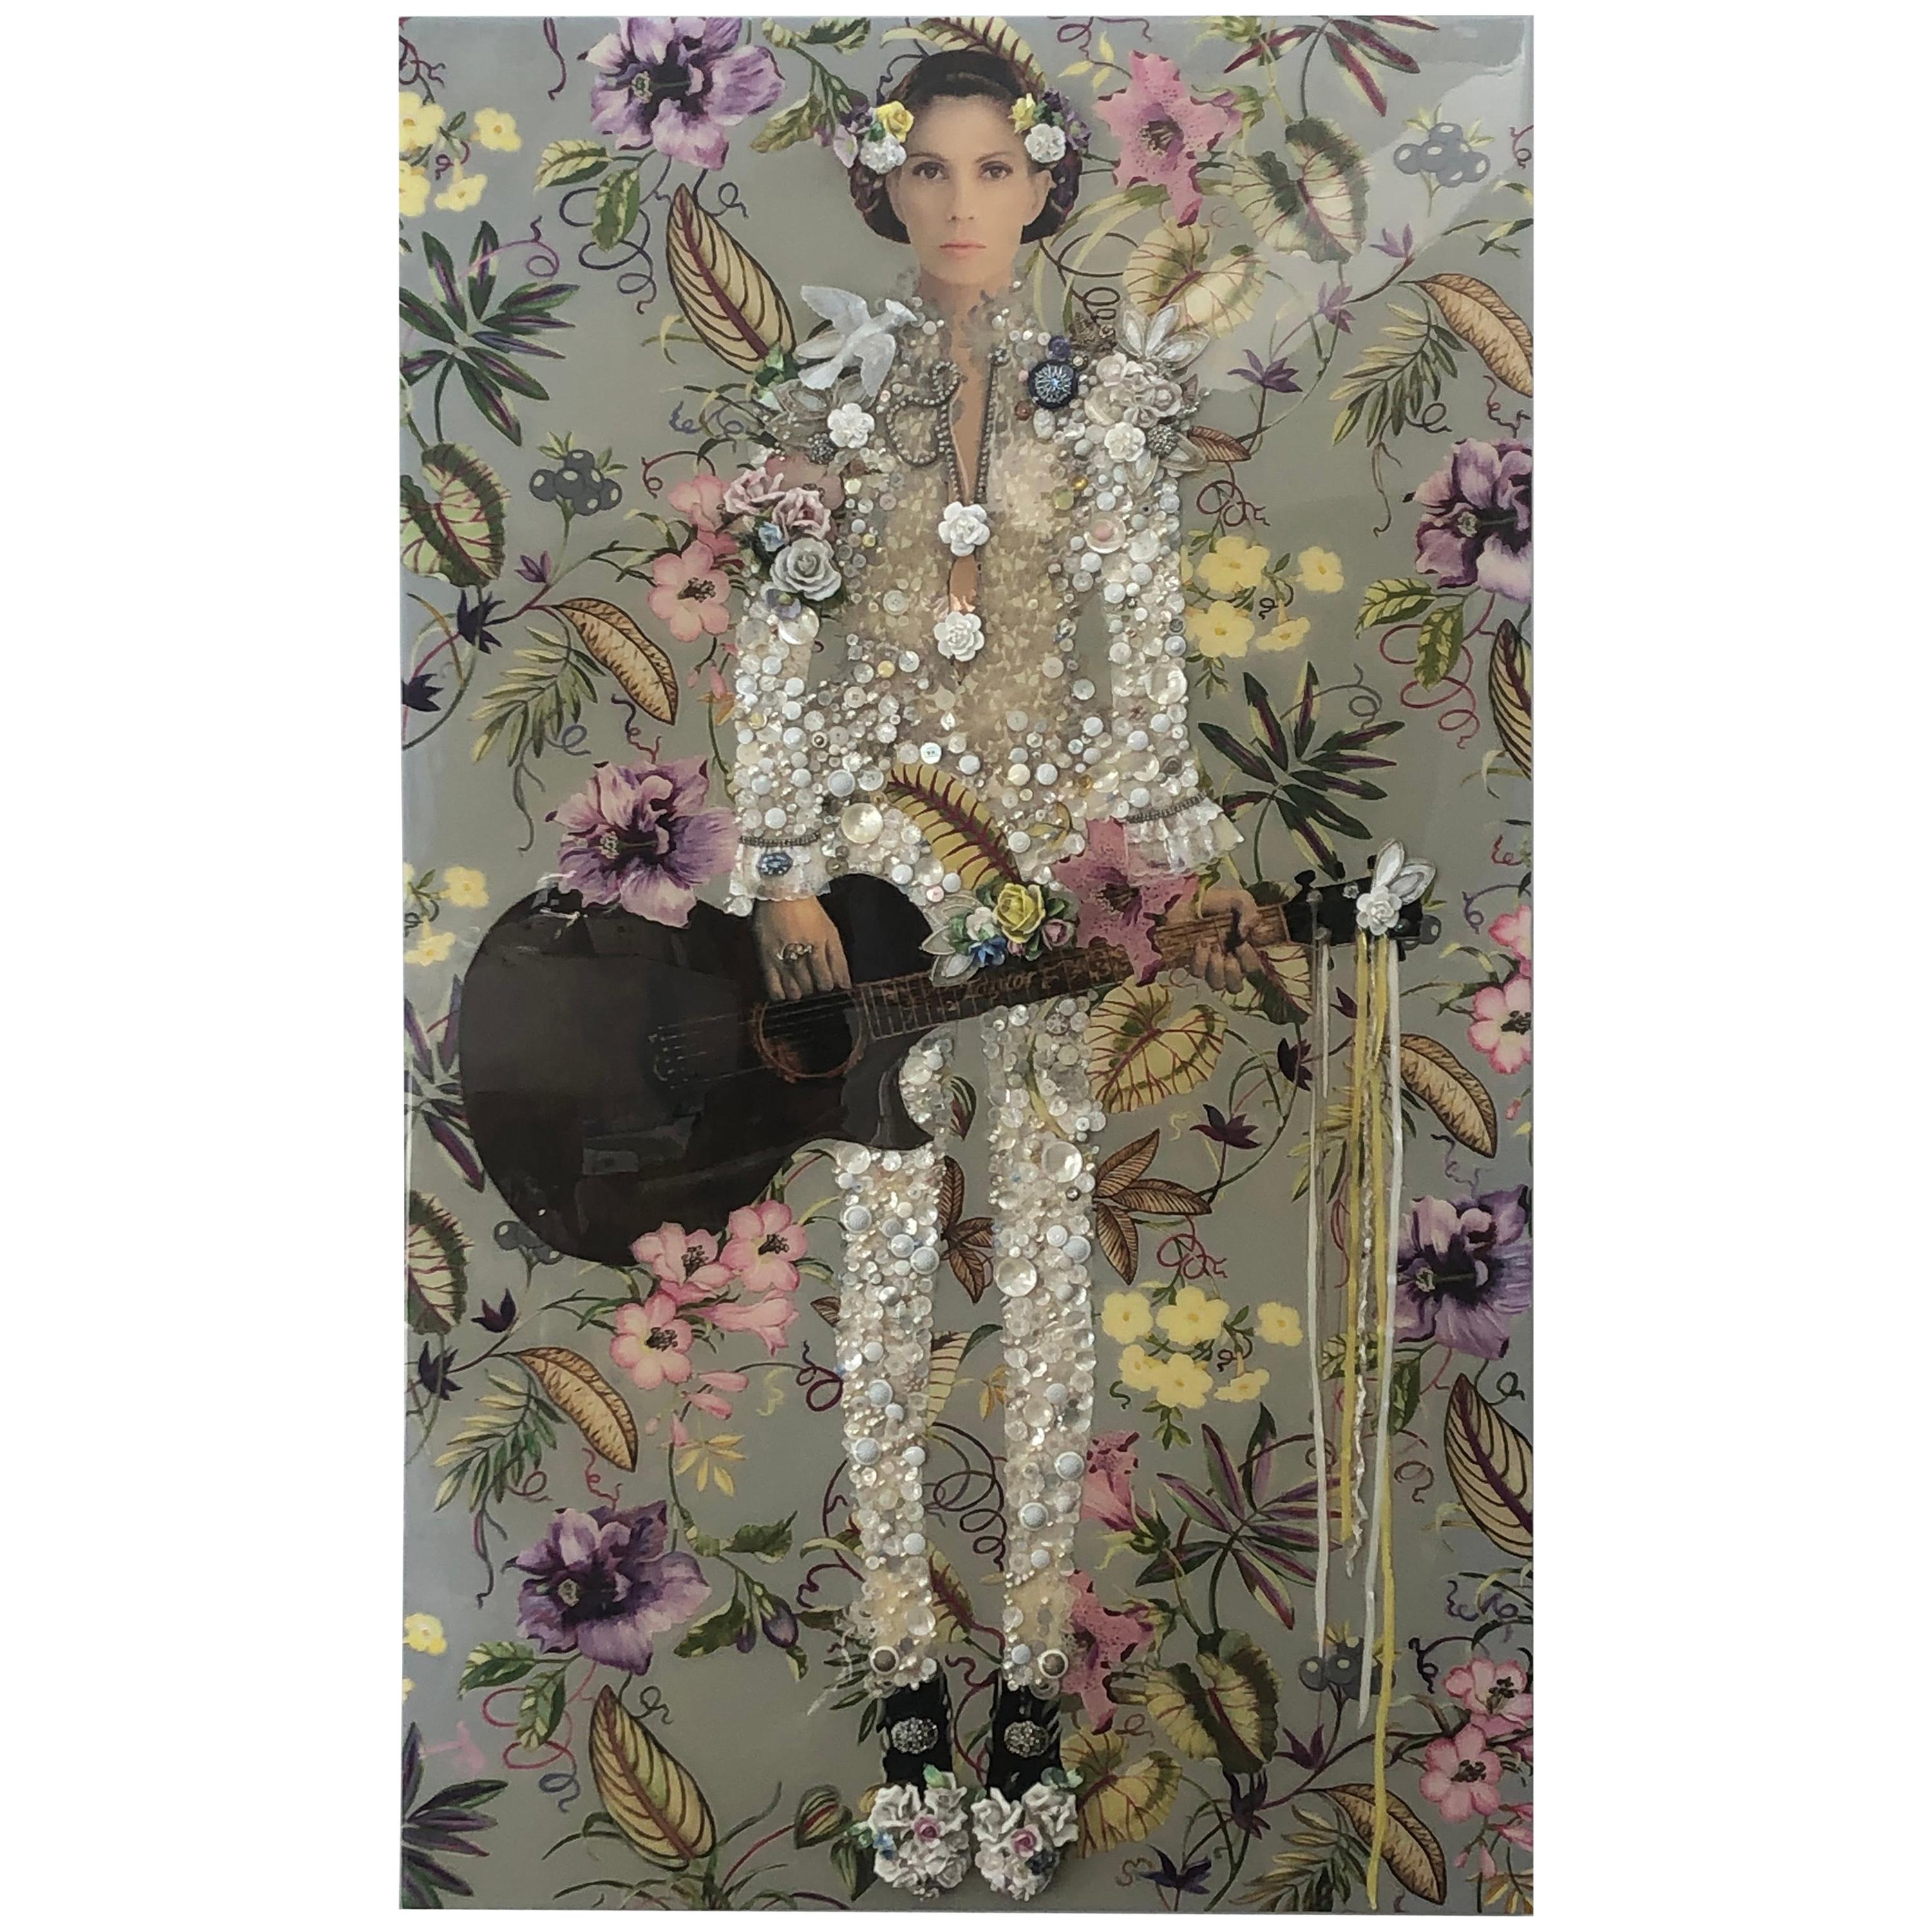 Nina Surel "Woman With Guitar" Mixed-Media Collage Portrait, USA, 2010s For Sale